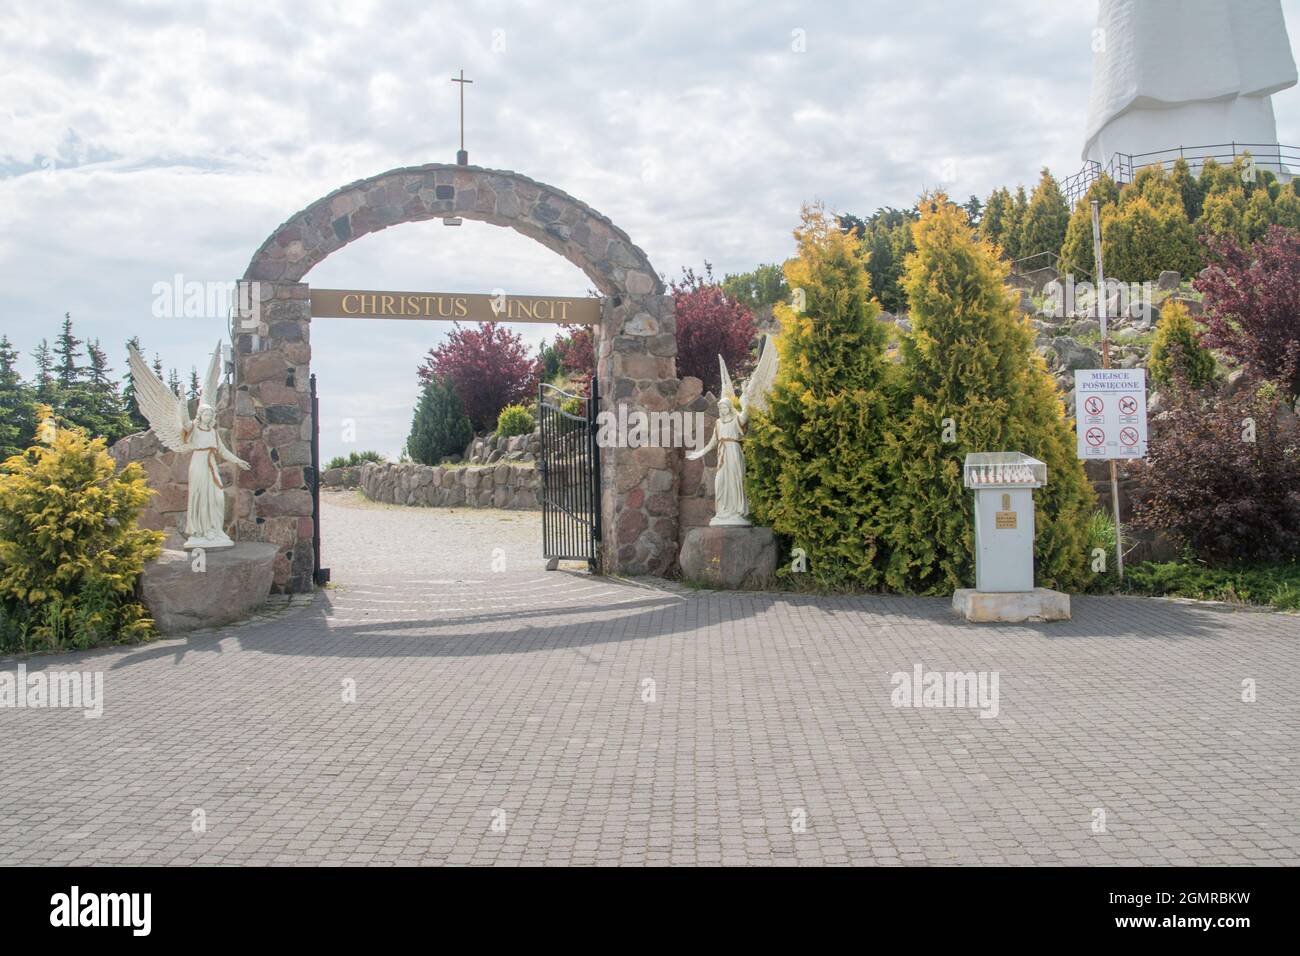 Swiebodzin, Poland - June 1, 2021: Entrance to alley to statue of Christ the King. Stock Photo